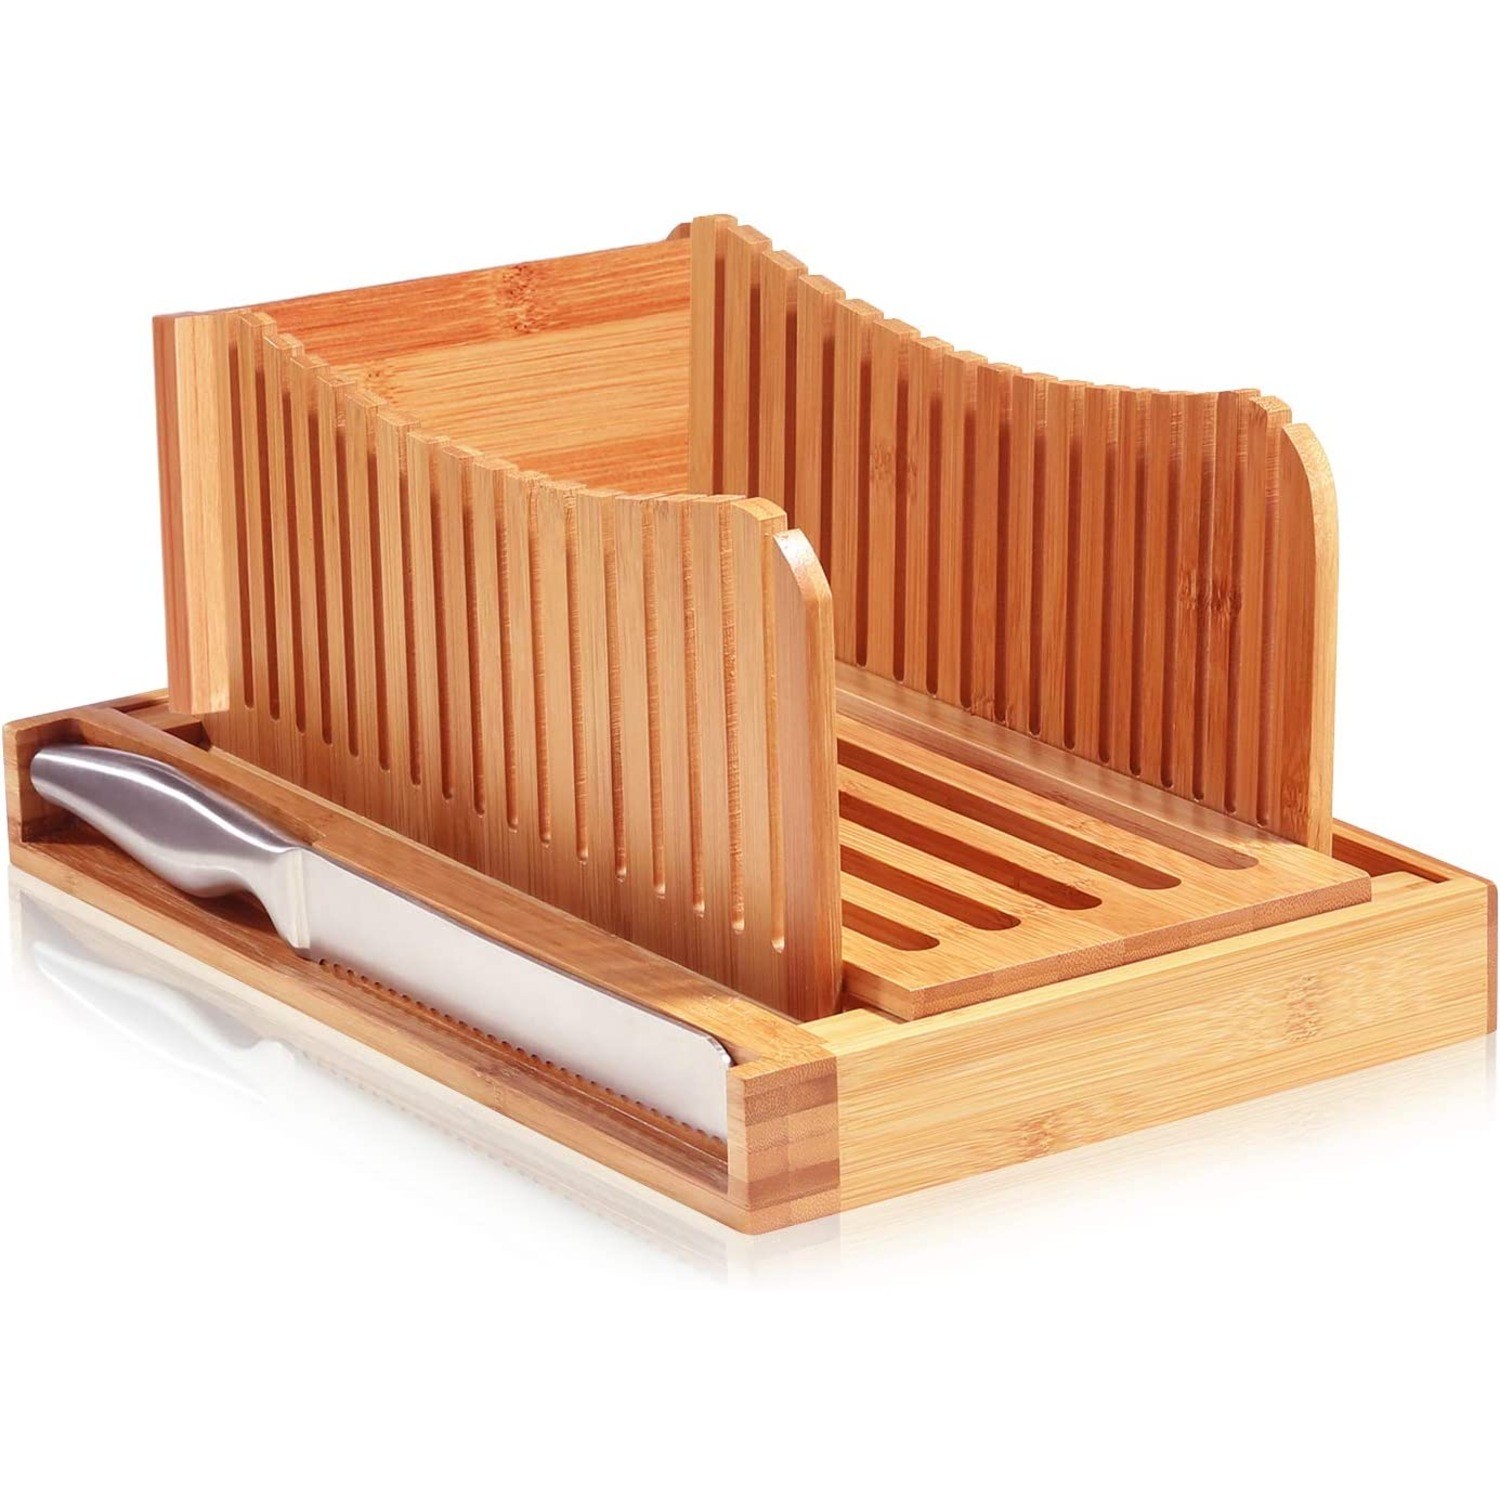 Mama's Great 2023 Updated Bamboo Bread Slicer for Homemade Bread - Ecofriendly, Compact & Foldable - Adjustable Slicing Guides with Sturdy Wooden